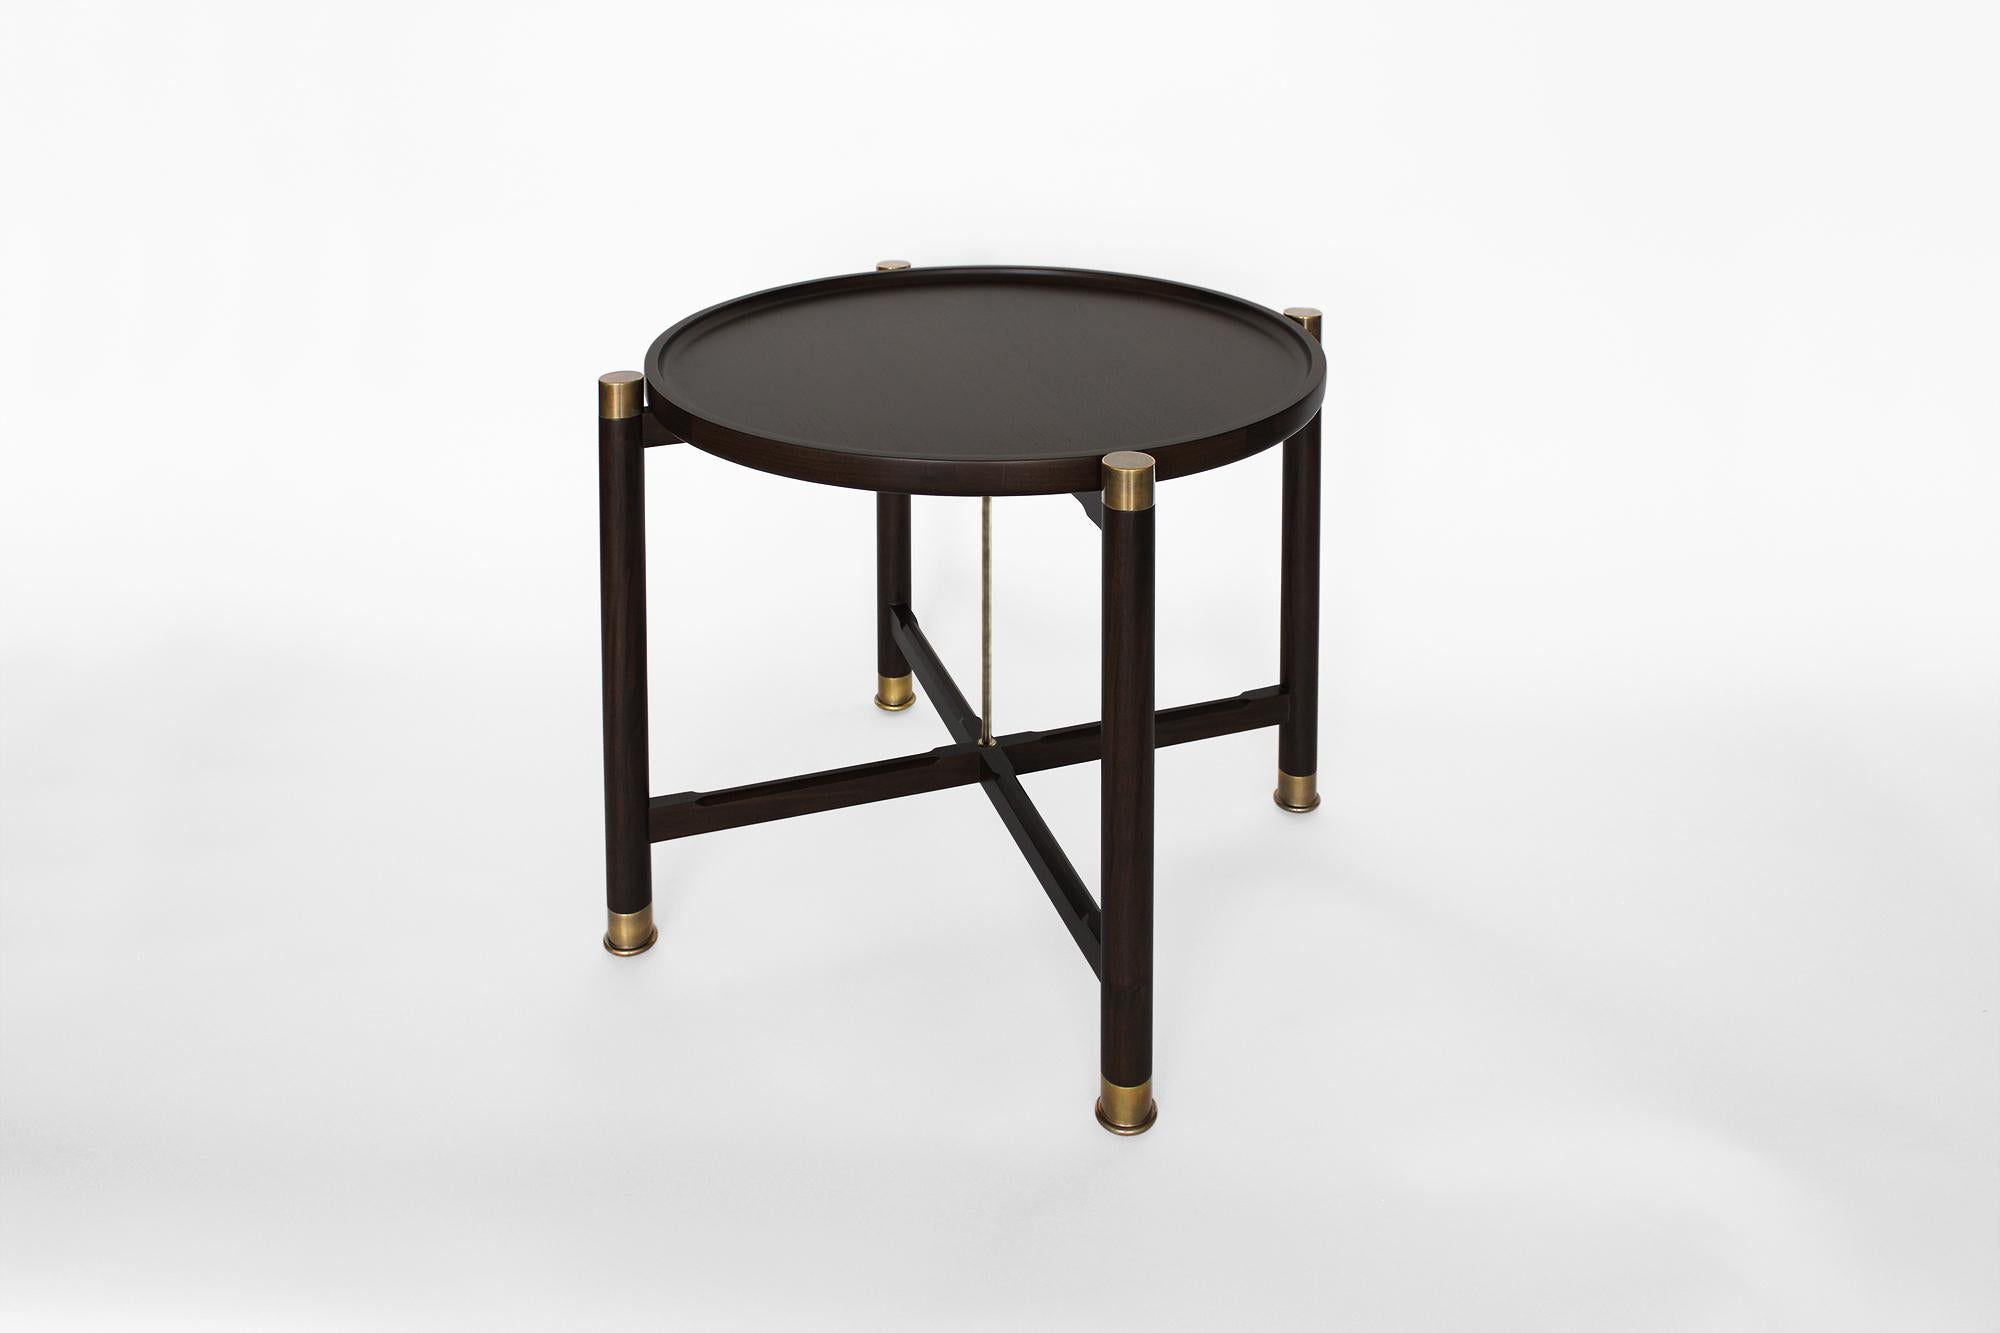 American Otto Round Side Table in Ebonized Oak with Antique Brass Fittings and Stem For Sale